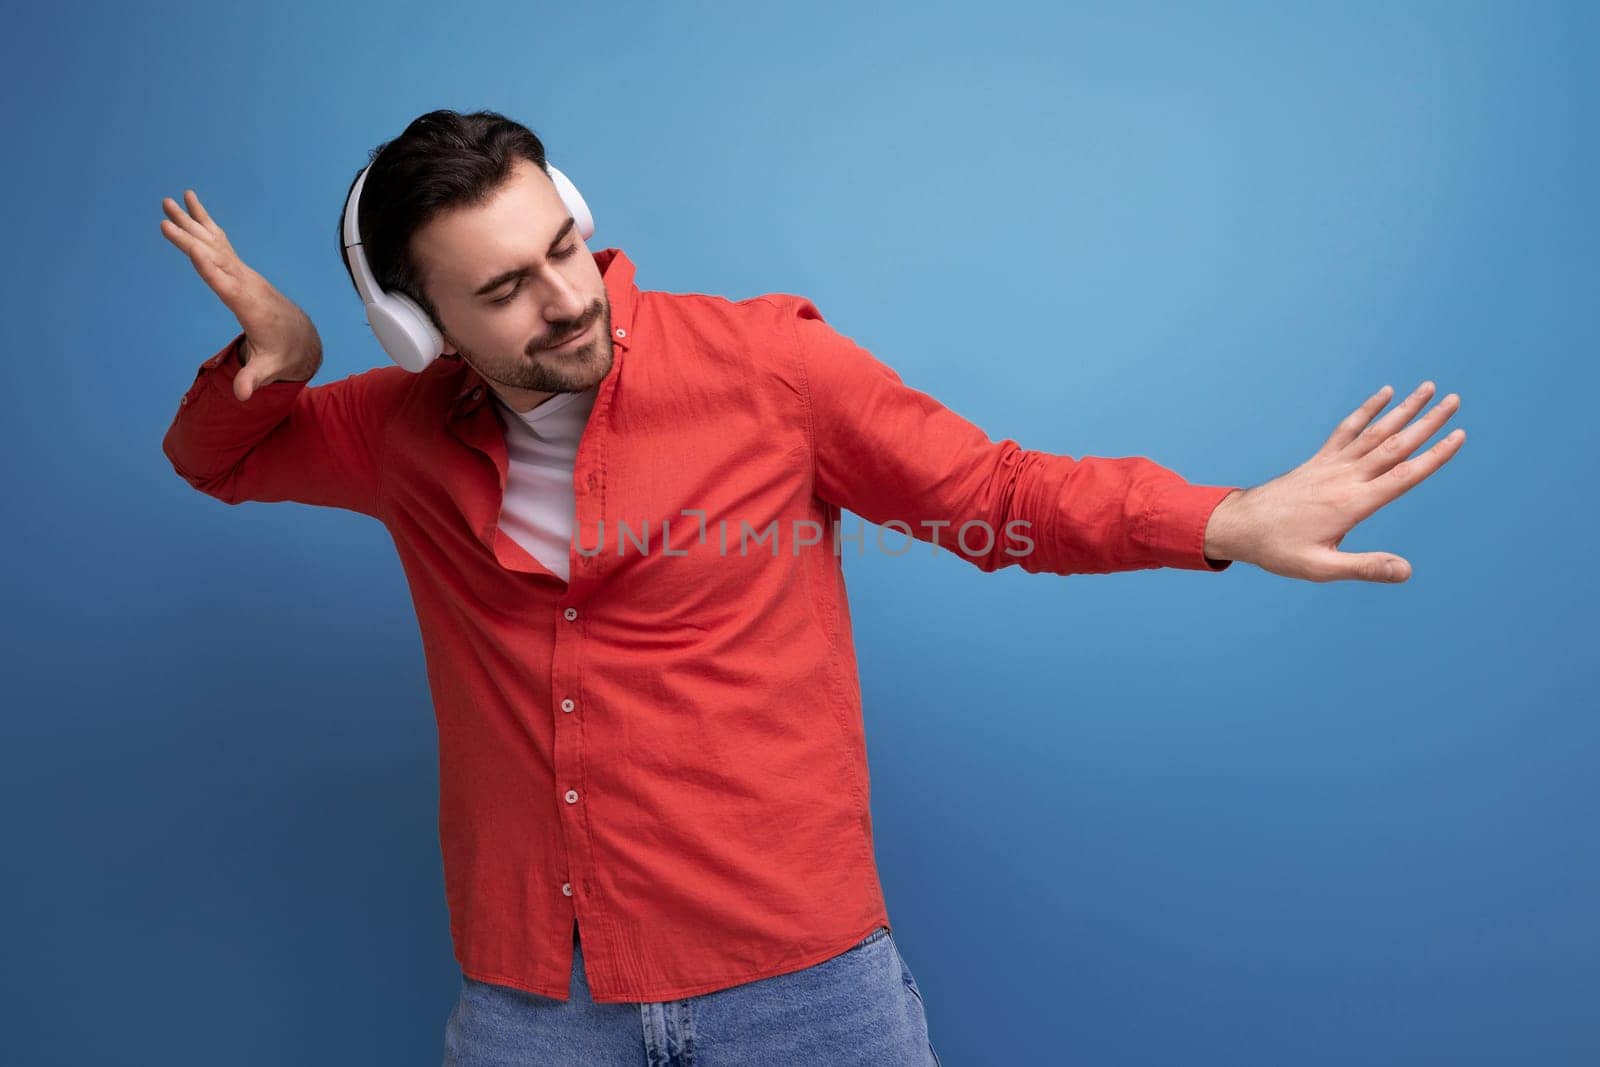 European dark-haired 35 year old man enjoys listening to his favorite music playing from headphones.